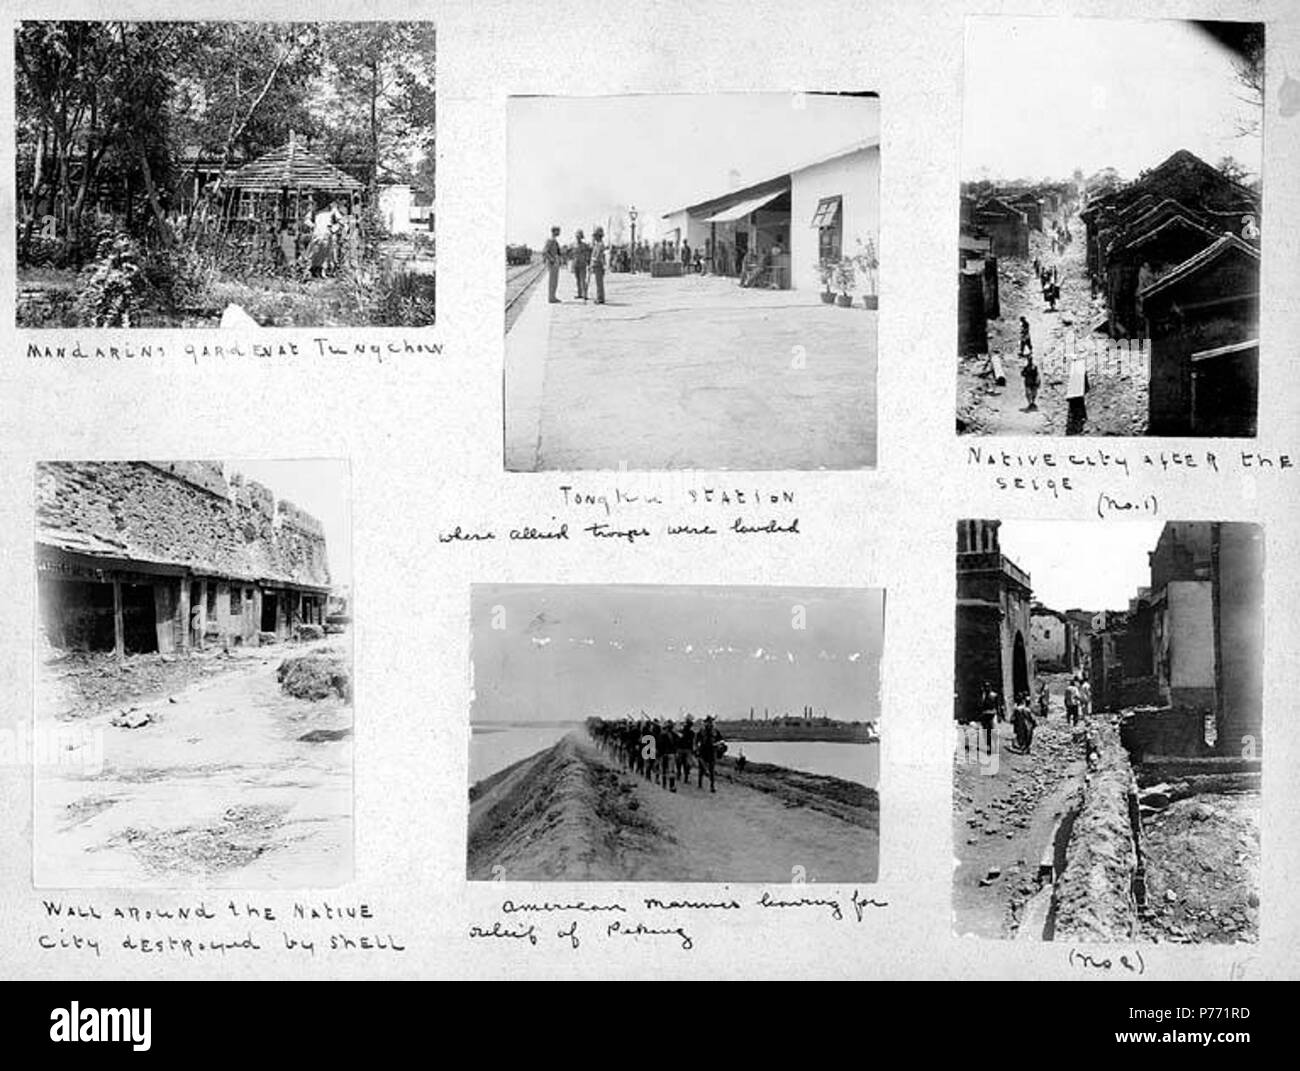 . English: 7.15 Military activities, ca. 1899-1901 . English: Captions on album page: Mandarin's garden at Tungchow; Tongku station where Allied troops were landed; Native city after the seige; Wall around the native city destroyed by shell; American Marines leaving for relief of Peking . PH Coll 241.B15a-f Subjects (LCTGM): Gardens--China; Railroad stations--China; Ethnic neighborhoods--China; City walls--China; Marines (Military personnel); War damage Subjects (LCSH): China--History--Boxer Rebellion, 1899-1901--Destruction and pillage; China Relief Expedition (1900-1901)  . circa 1899-1901 1 Stock Photo